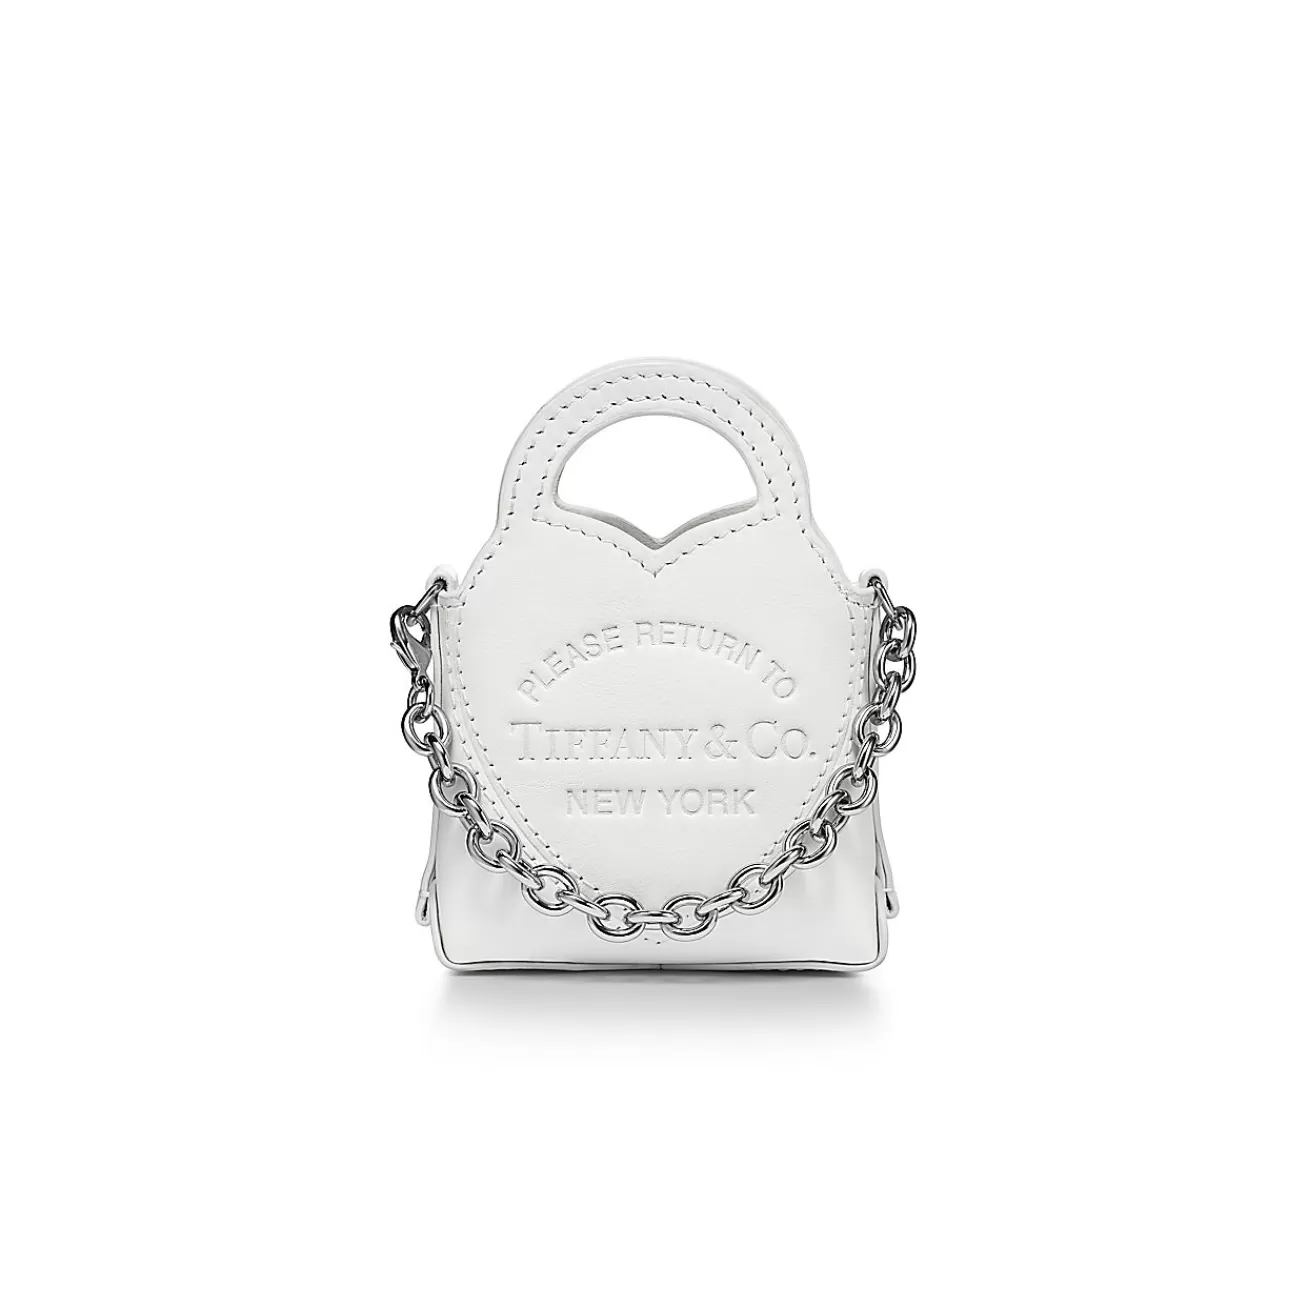 Tiffany & Co. Return to Tiffany® Nano Bag in White Leather | ^Women Small Leather Goods | Women's Accessories